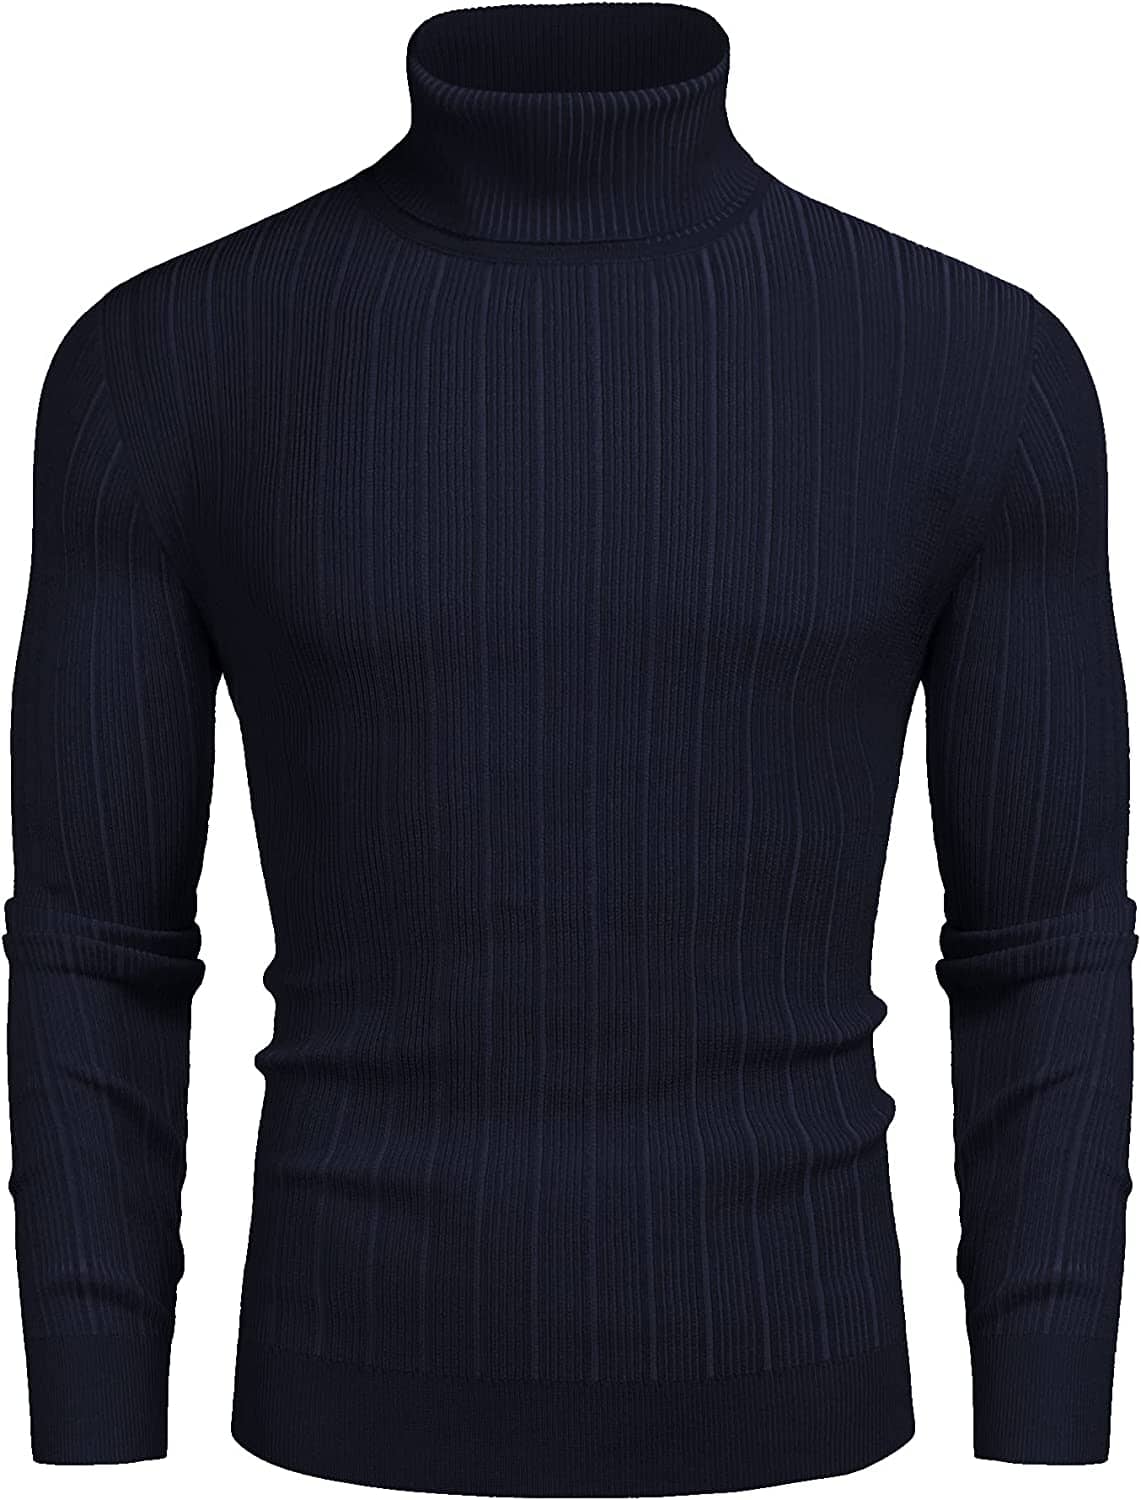 Slim Fit Knitted High Neck Pullover Sweaters (US Only) Sweaters COOFANDY Store Navy Blue S 